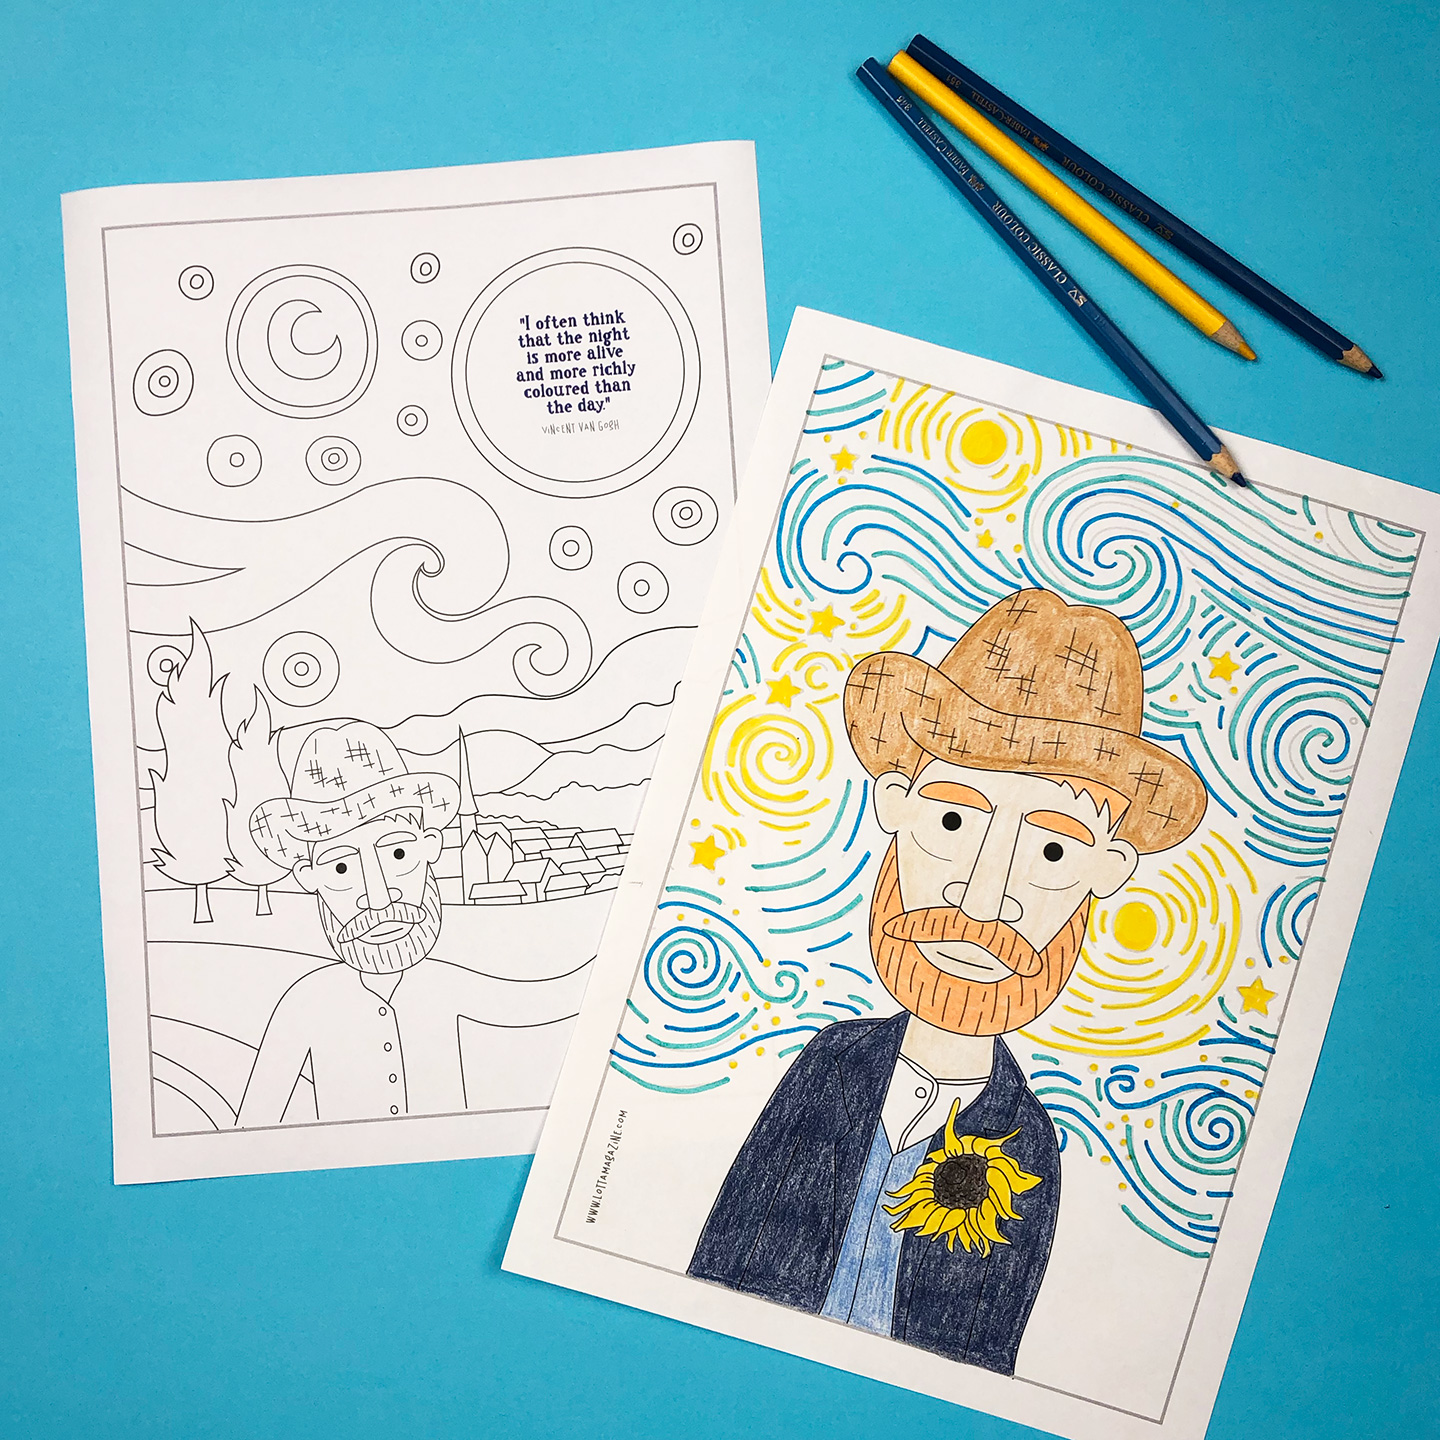 Van gogh colouring pages